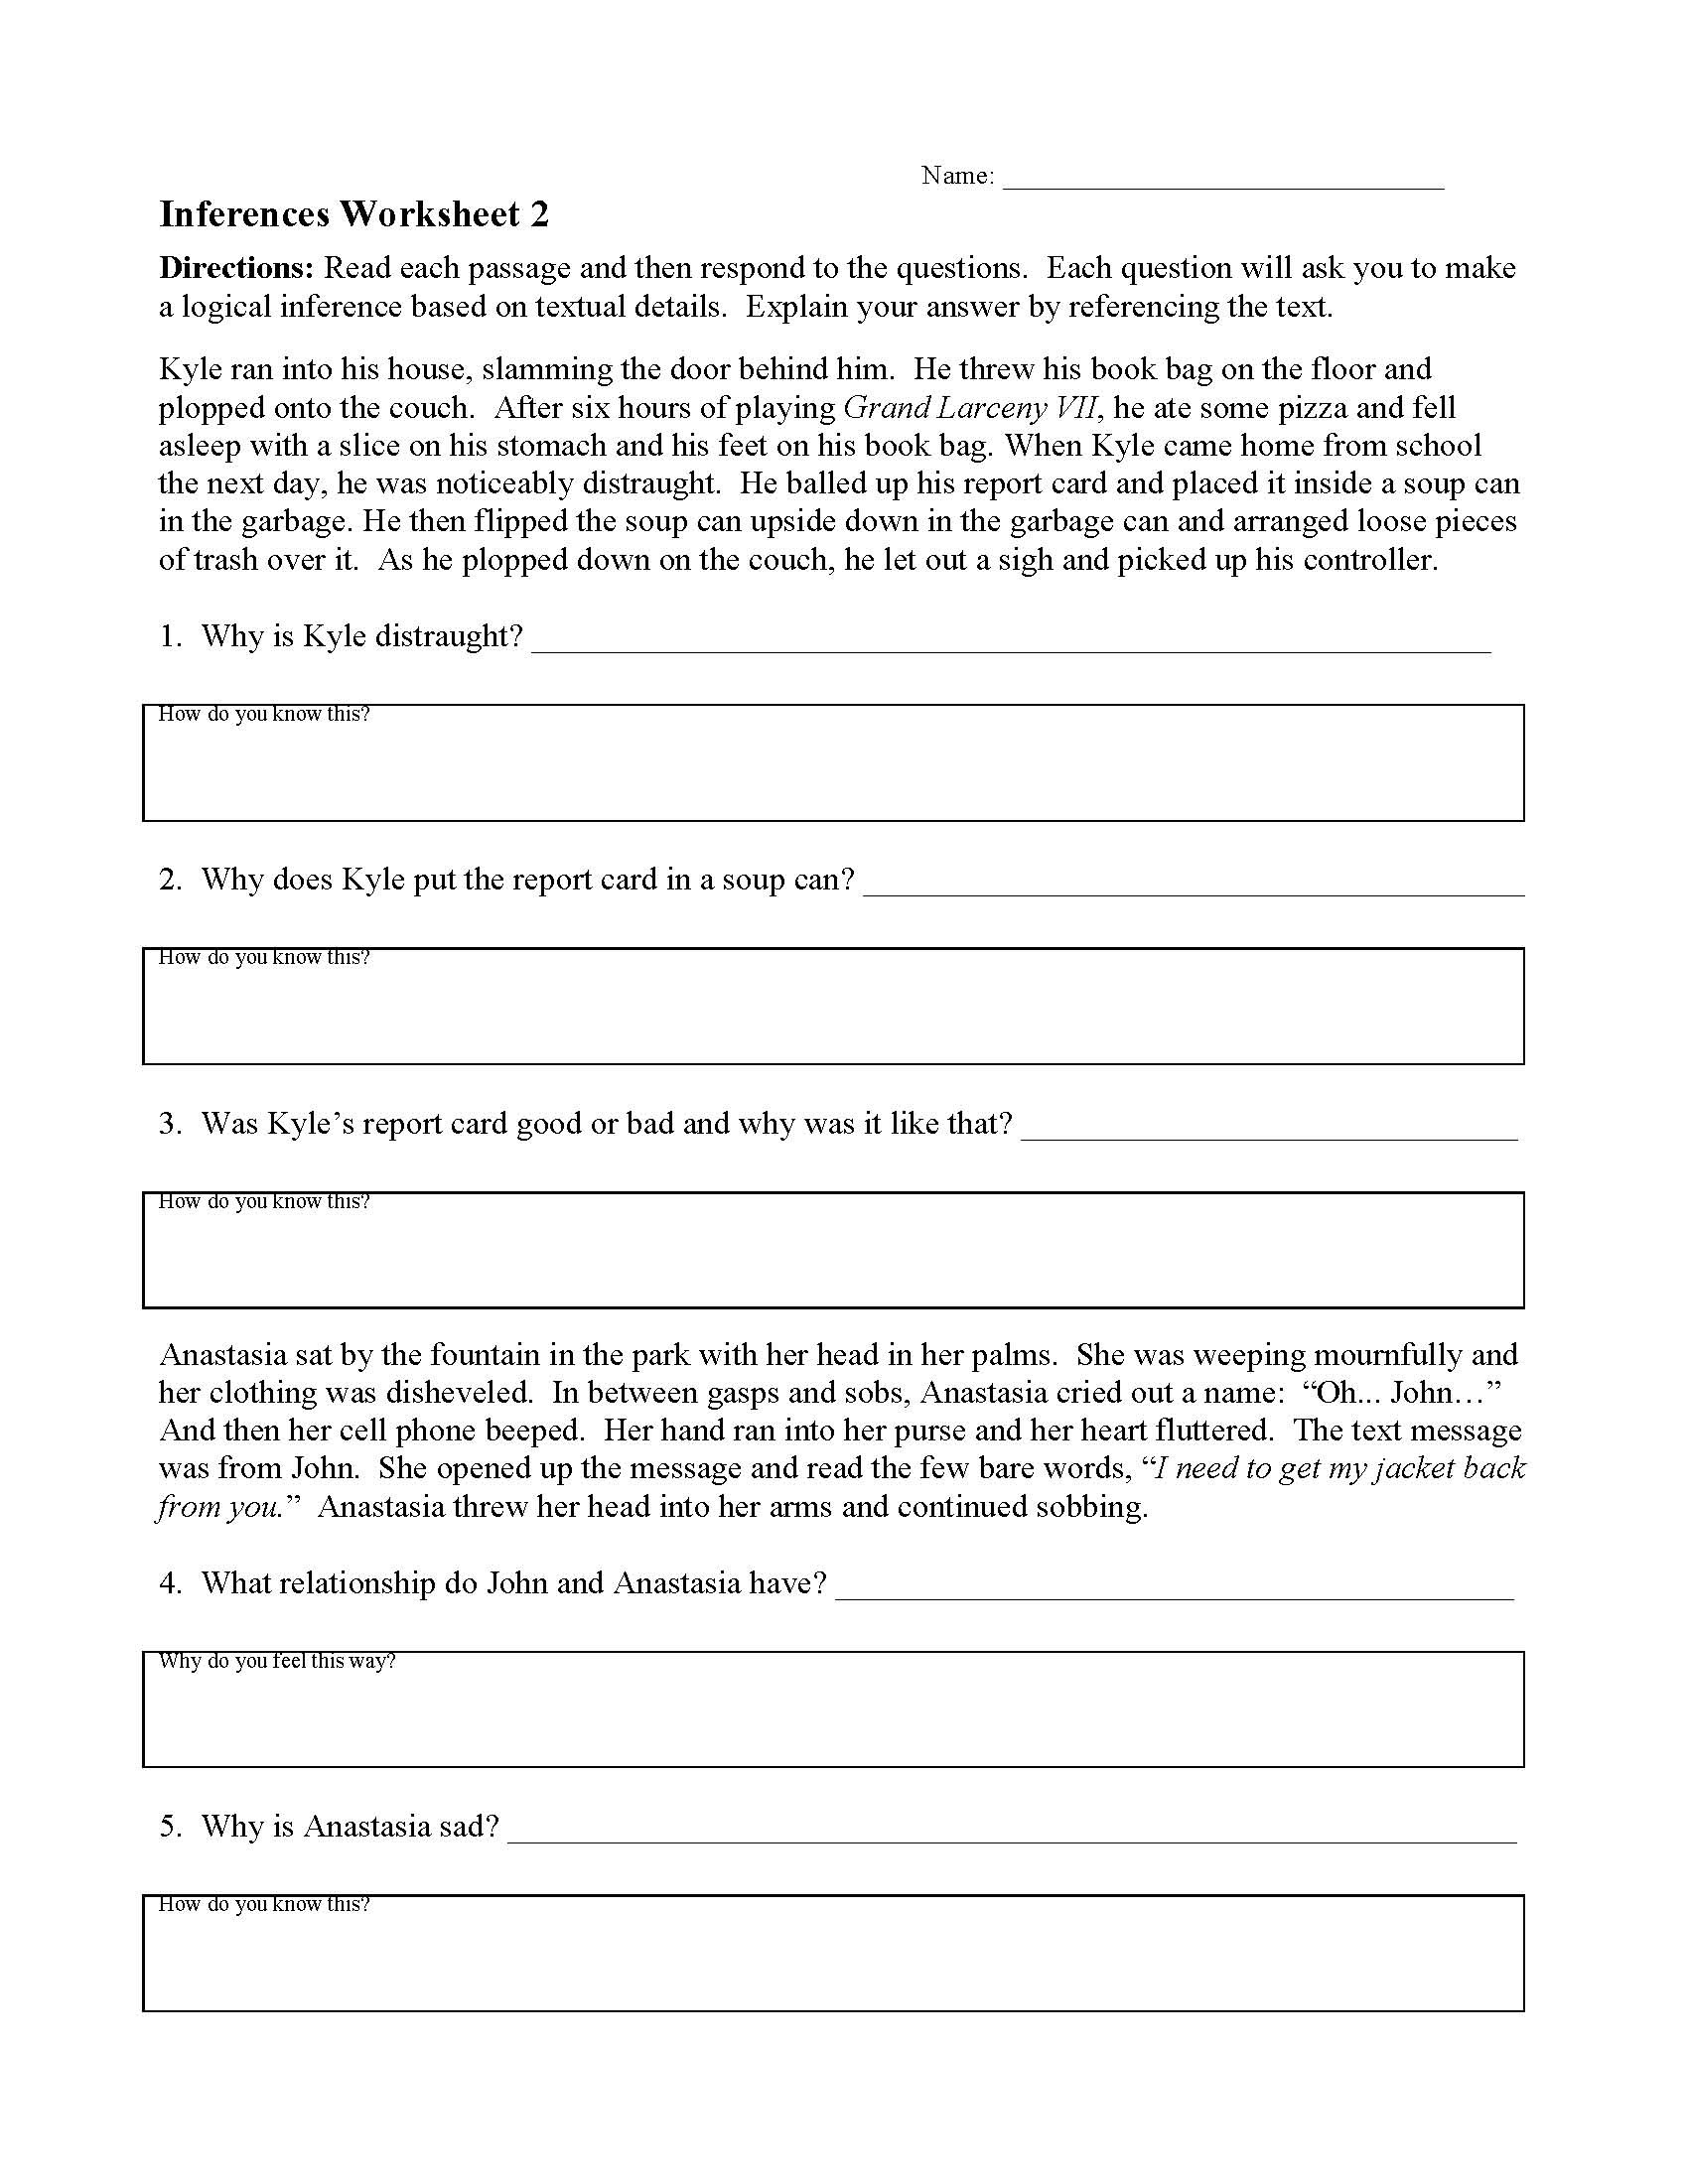 Written Document Analysis Worksheet Answers Inferences Worksheets